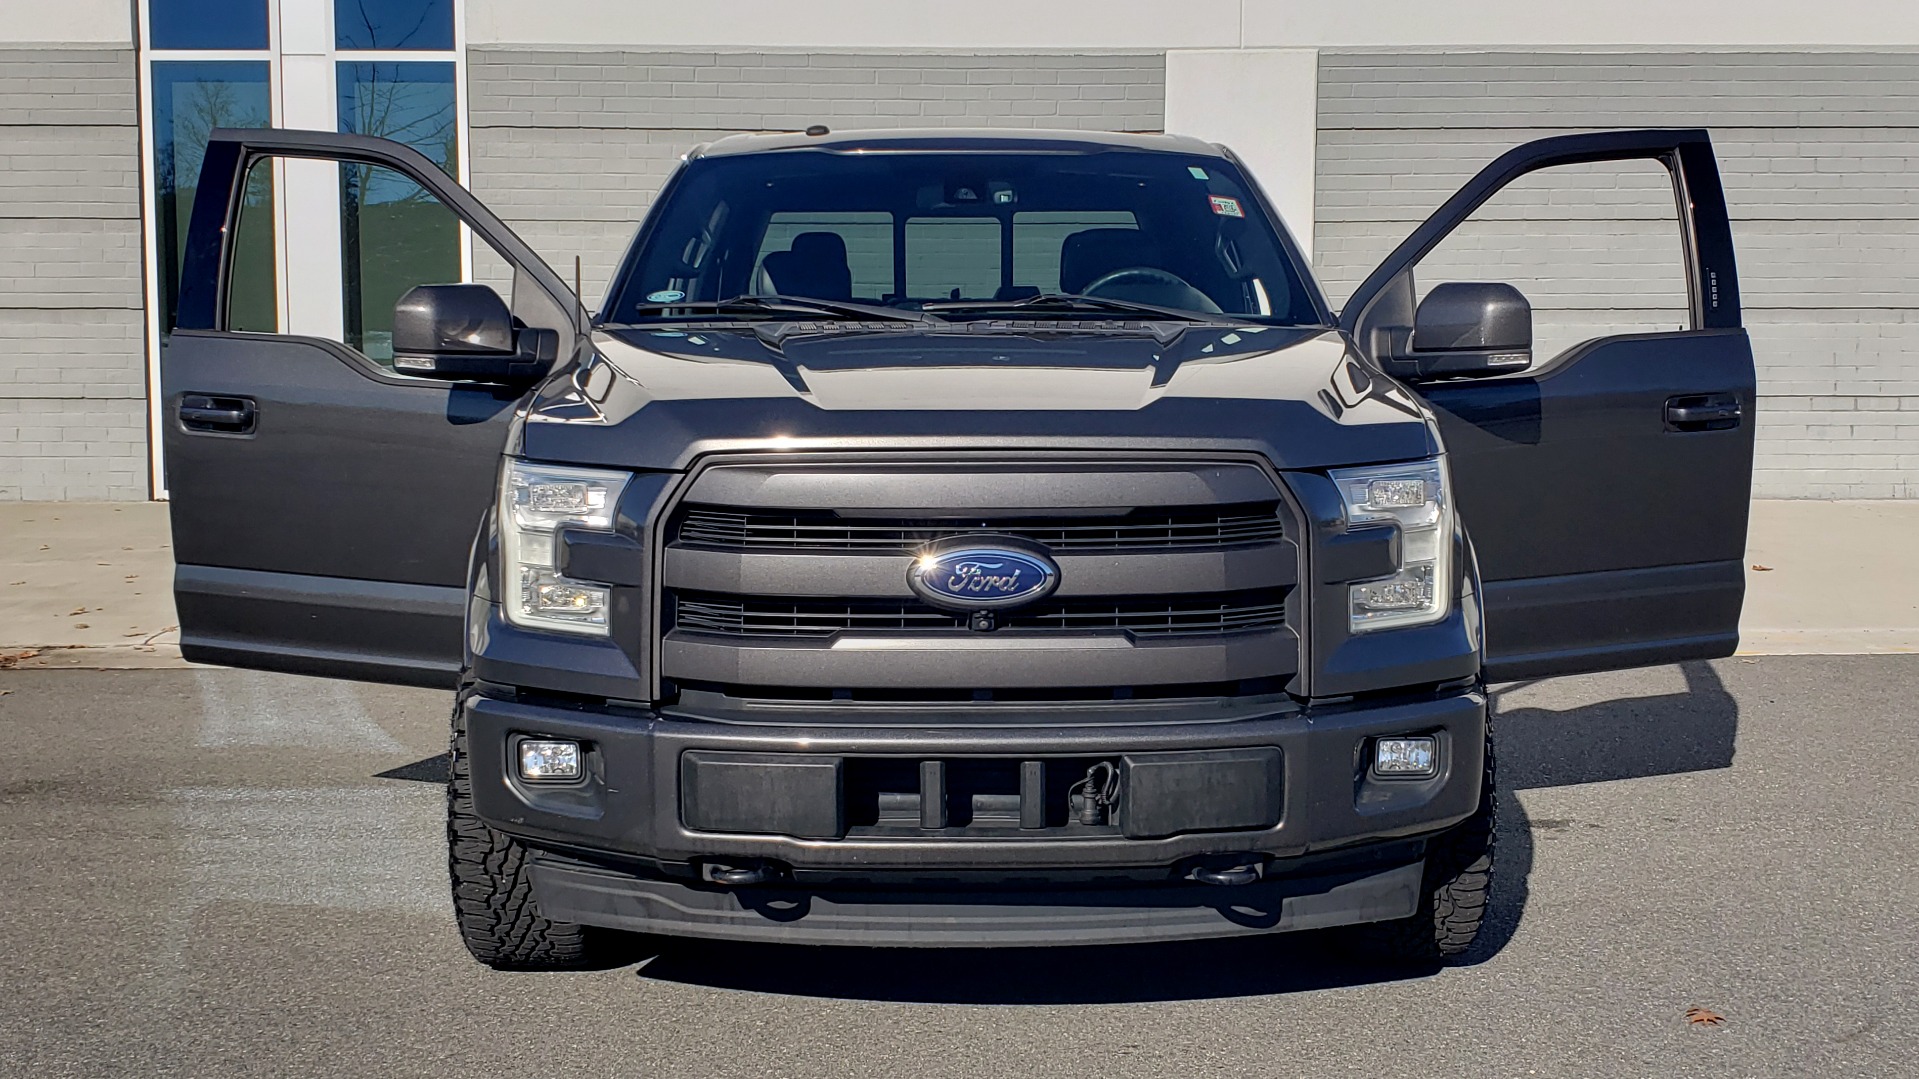 Used 2017 Ford F-150 LARIAT 4X4 SUPERCREW / 3.5L ECOBOOST / 10-SPD AUTO / NAV / SONY / REARVIEW for sale Sold at Formula Imports in Charlotte NC 28227 24